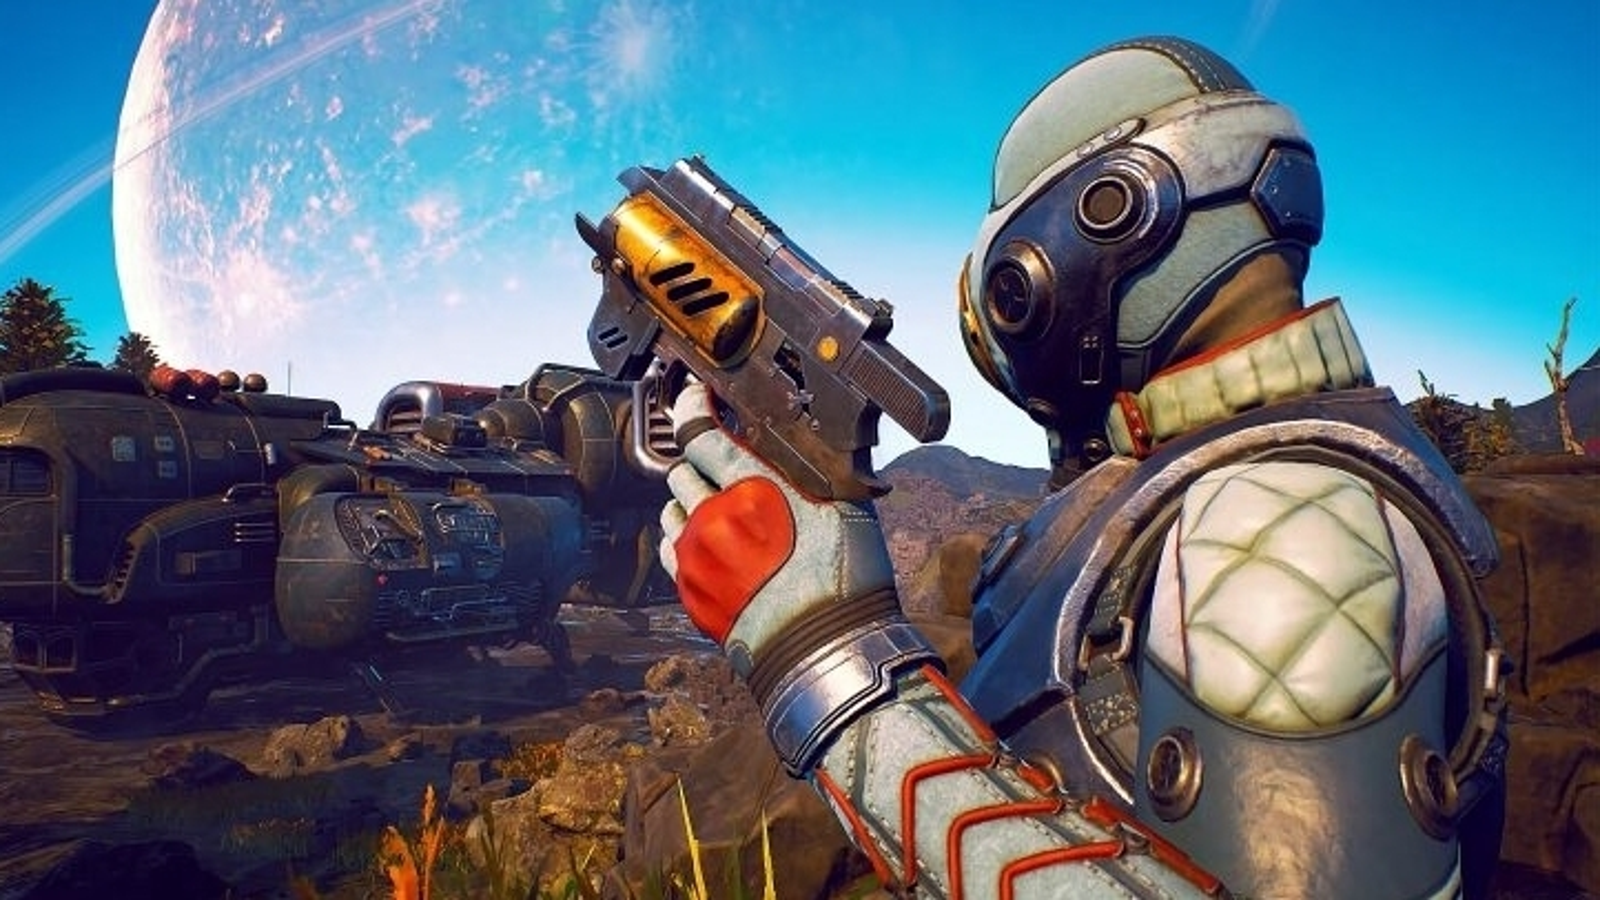 Here are 20 more minutes of The Outer Worlds gameplay from TGS